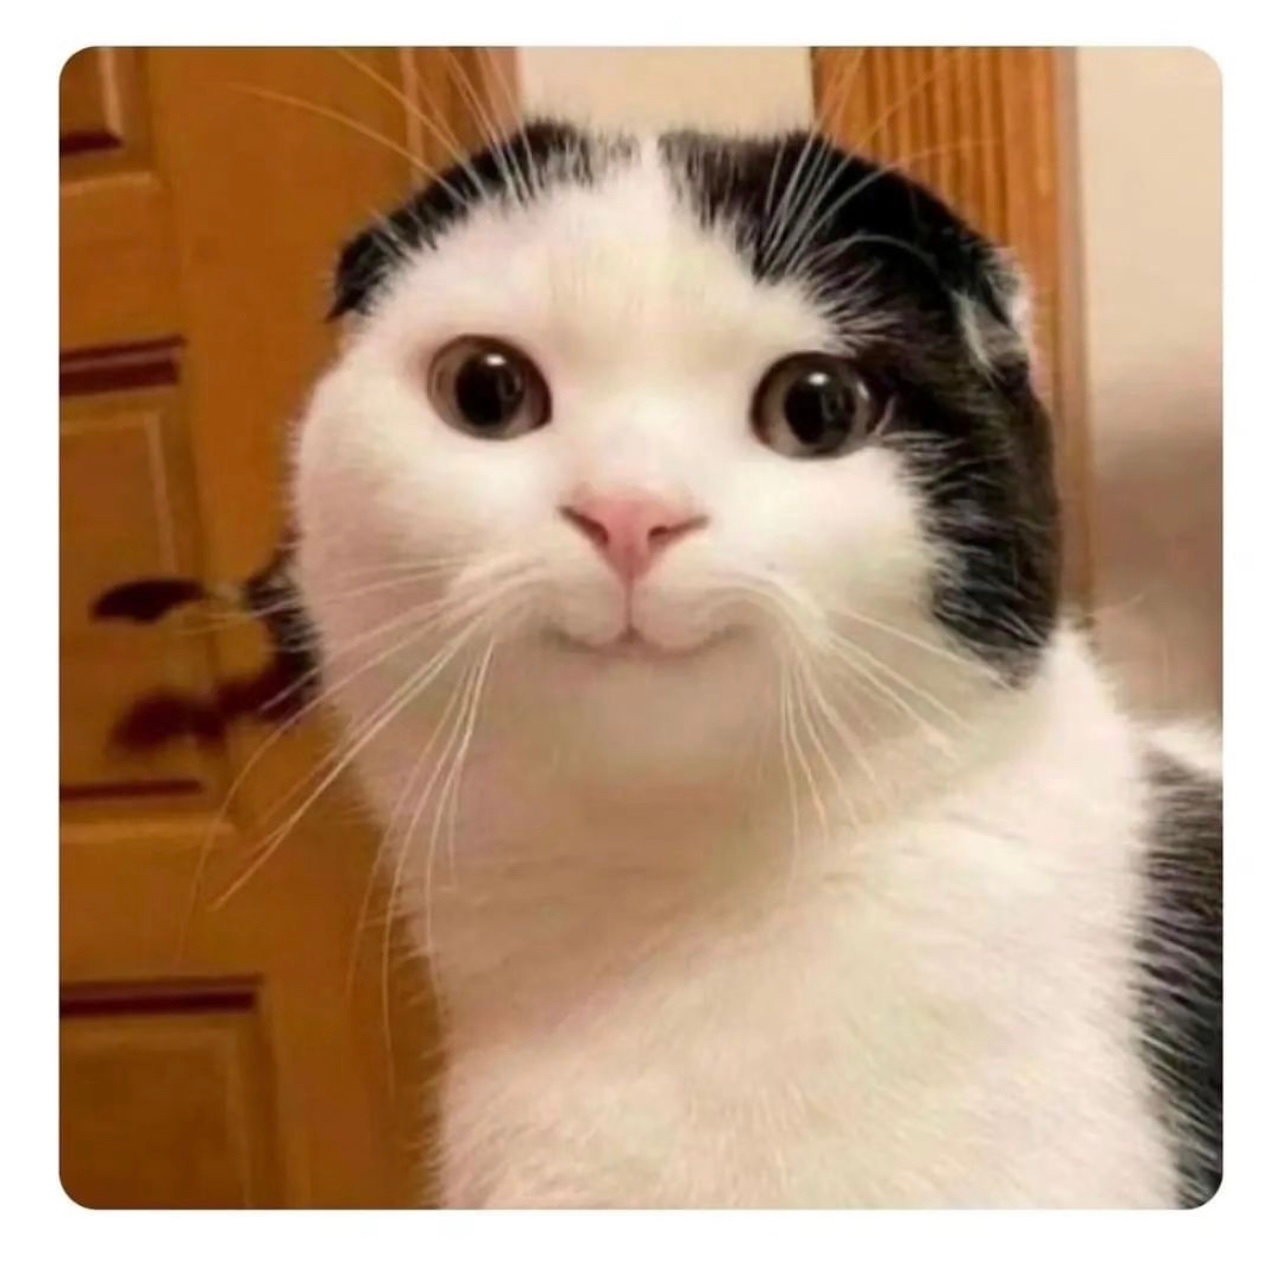 Meme of a cat awkwardly smiling.